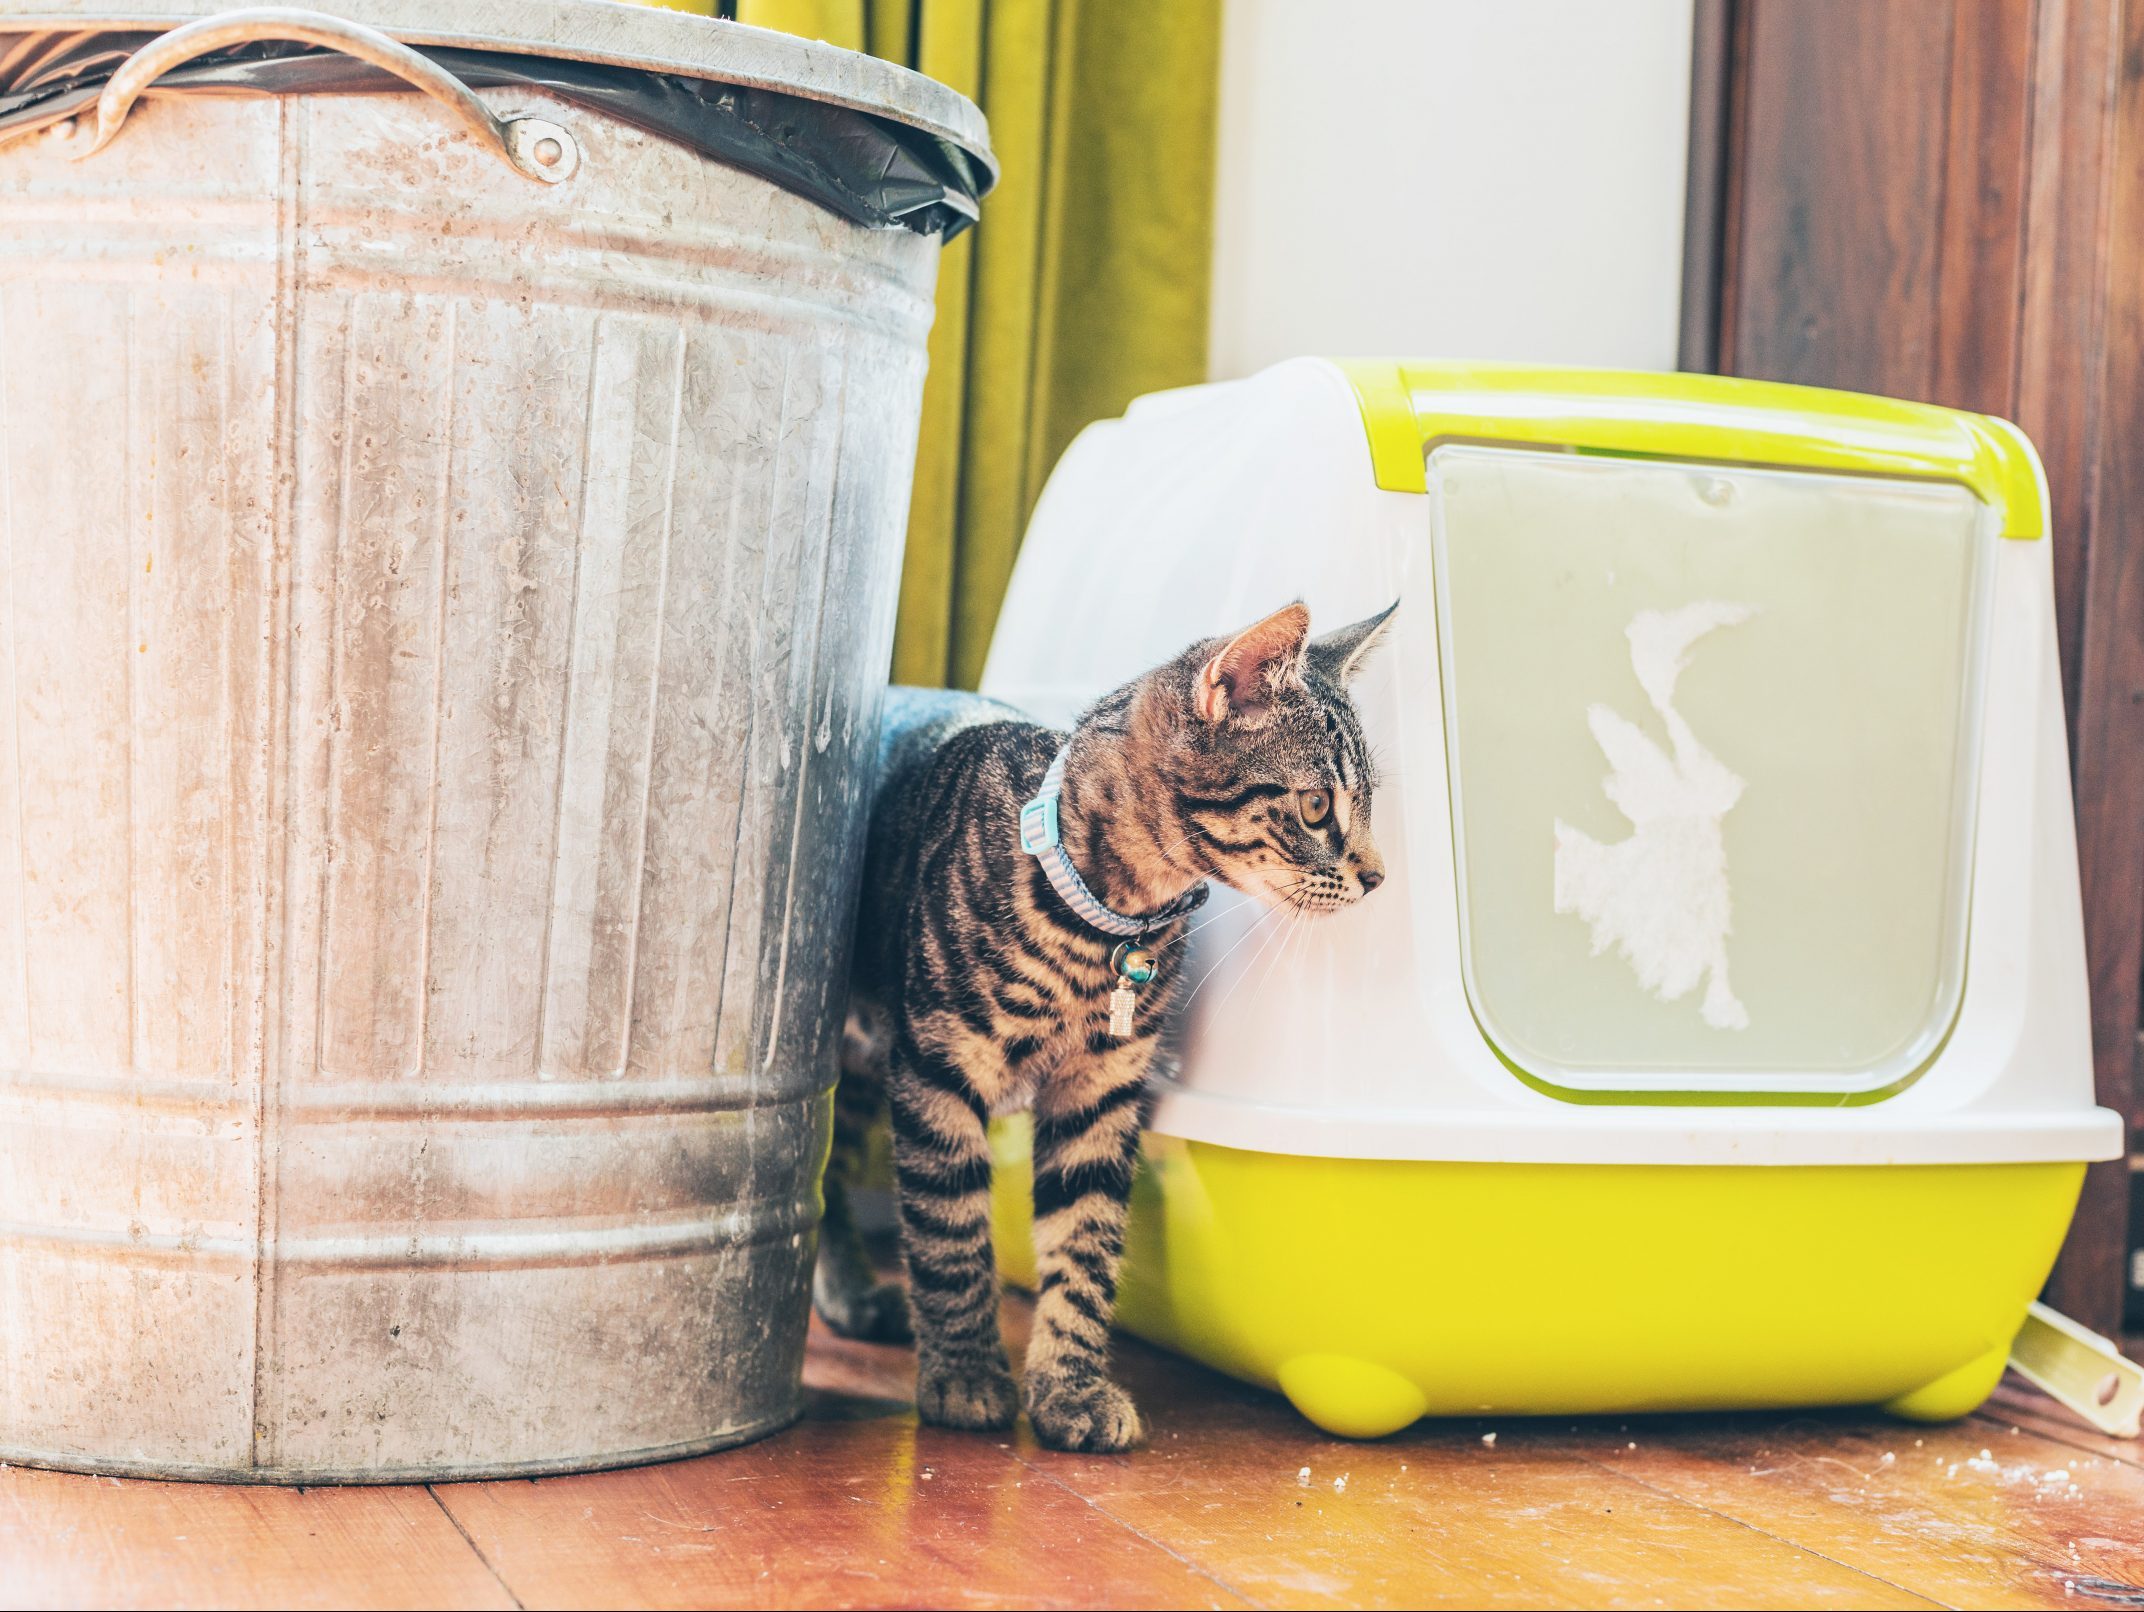 5 Best Trash Cans for Pet Waste (2022 Reviews)